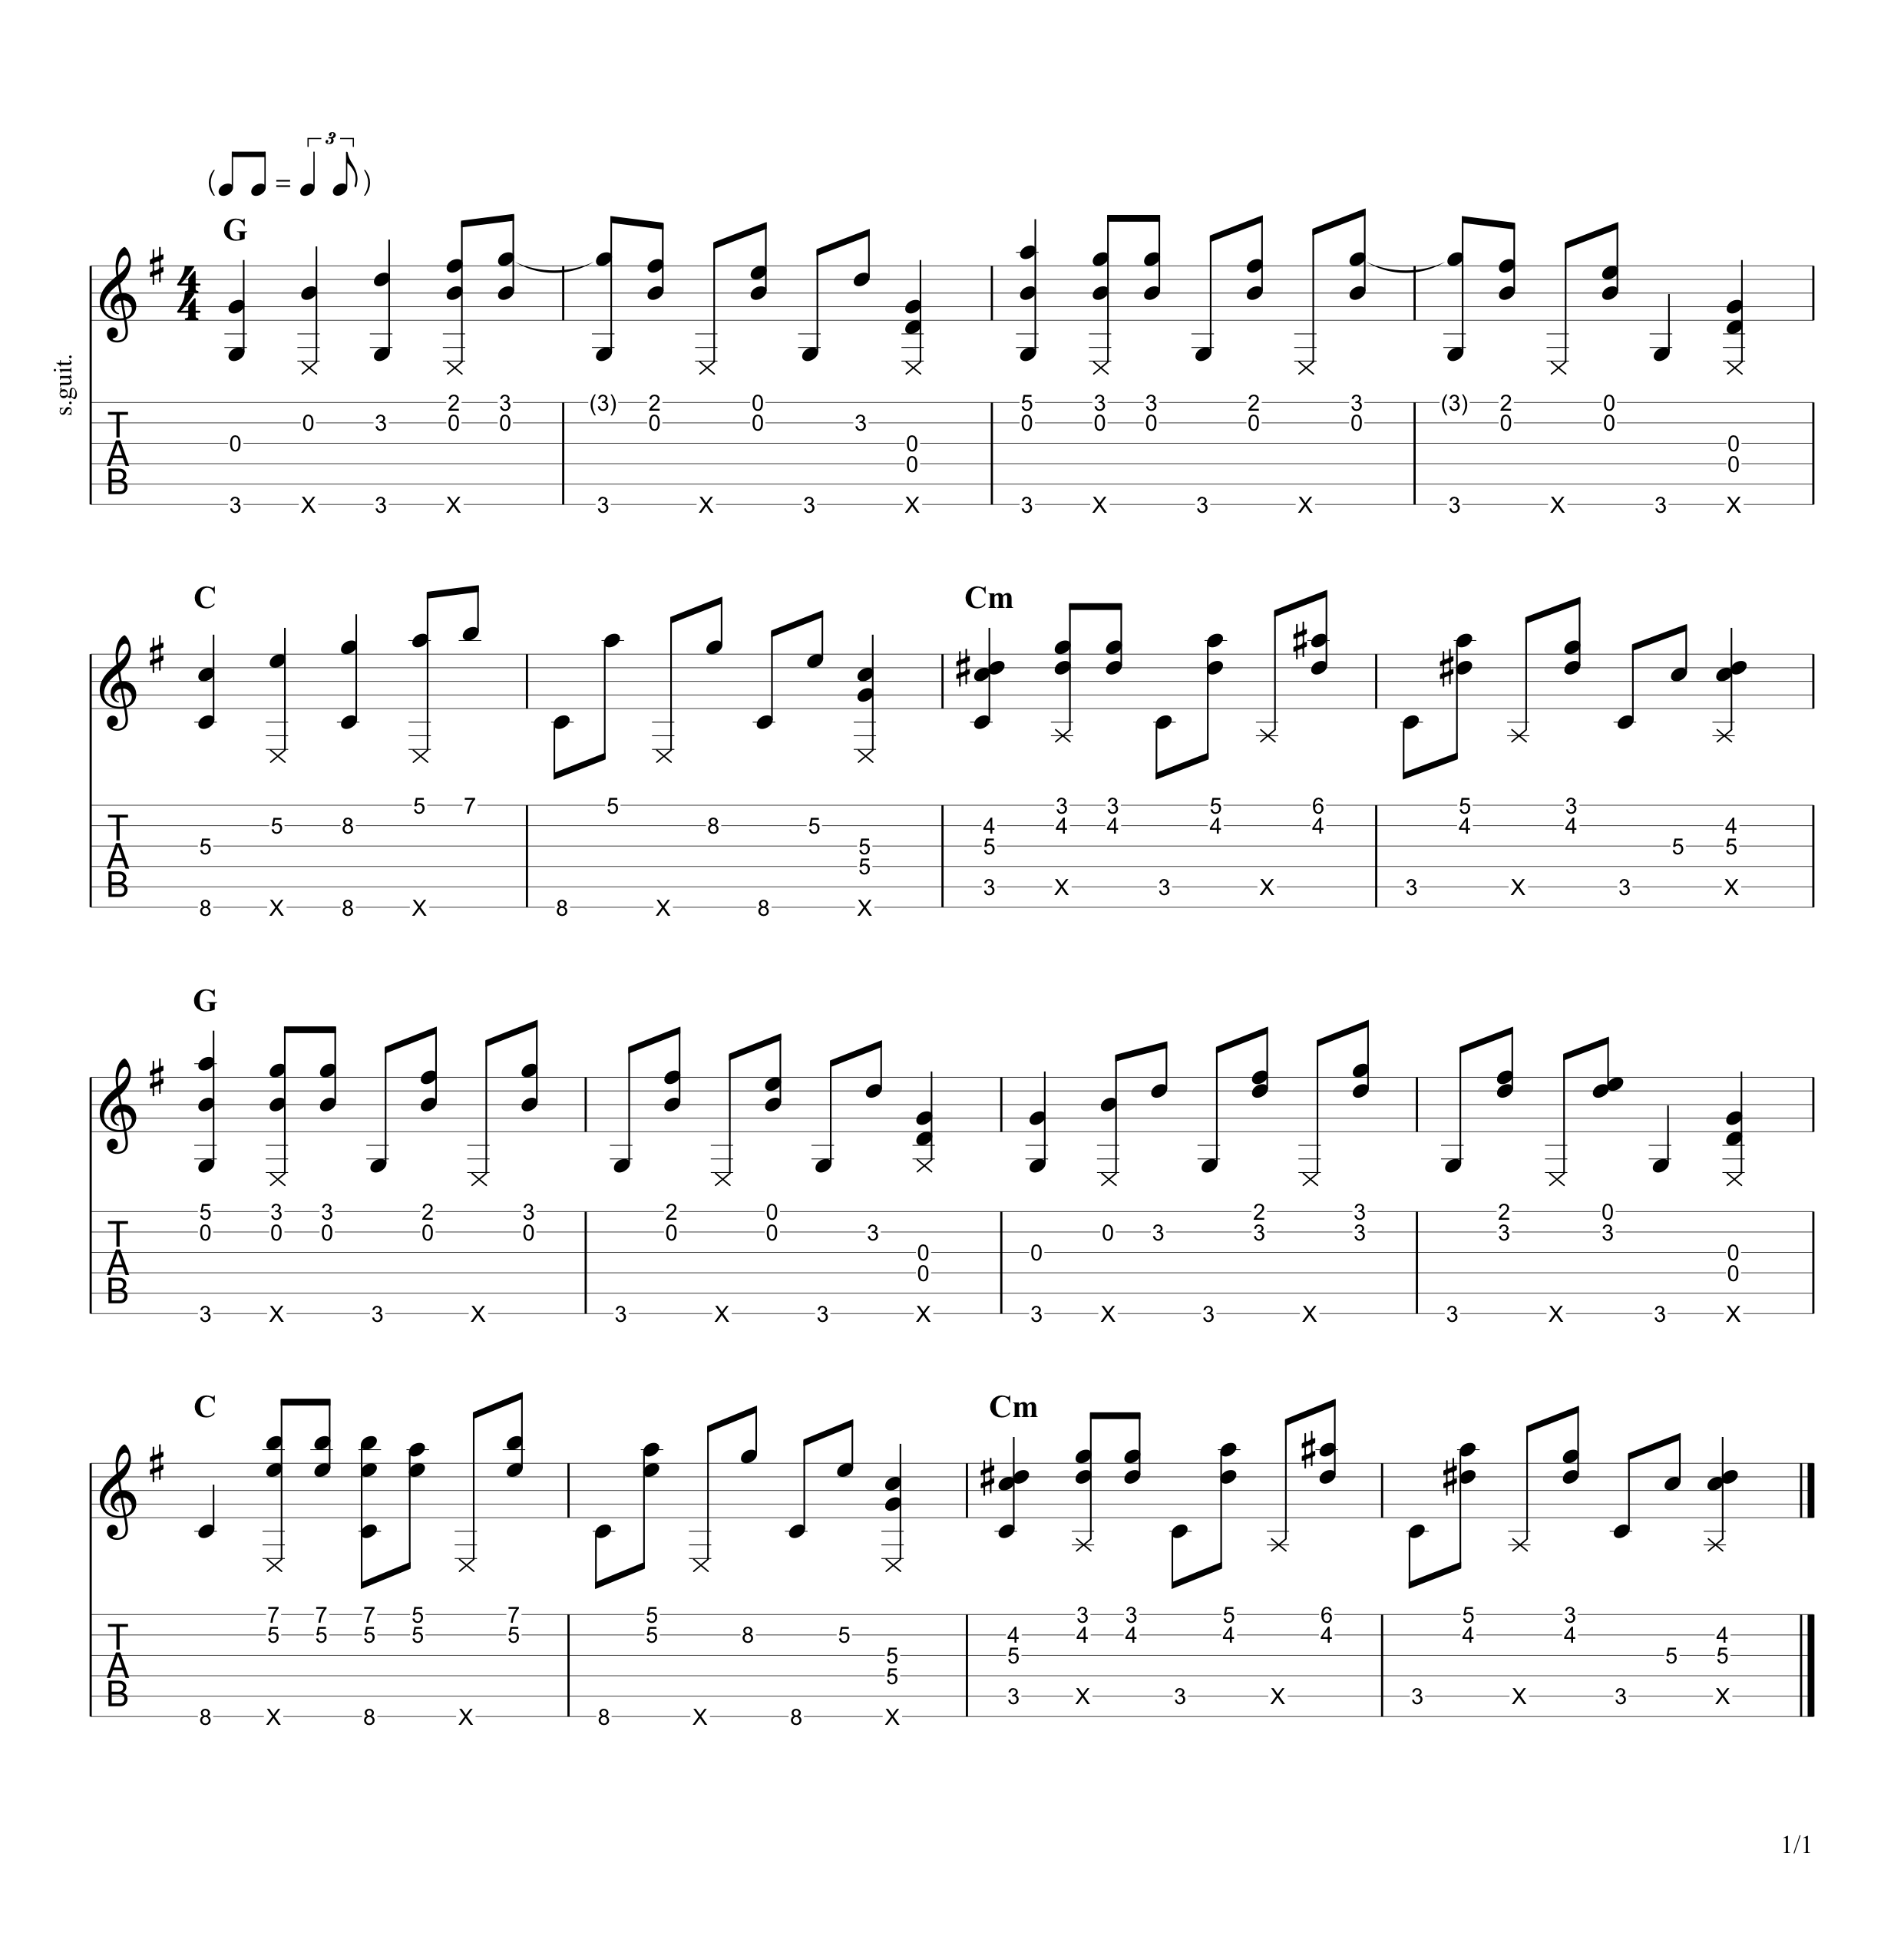 all i want for christmas chords